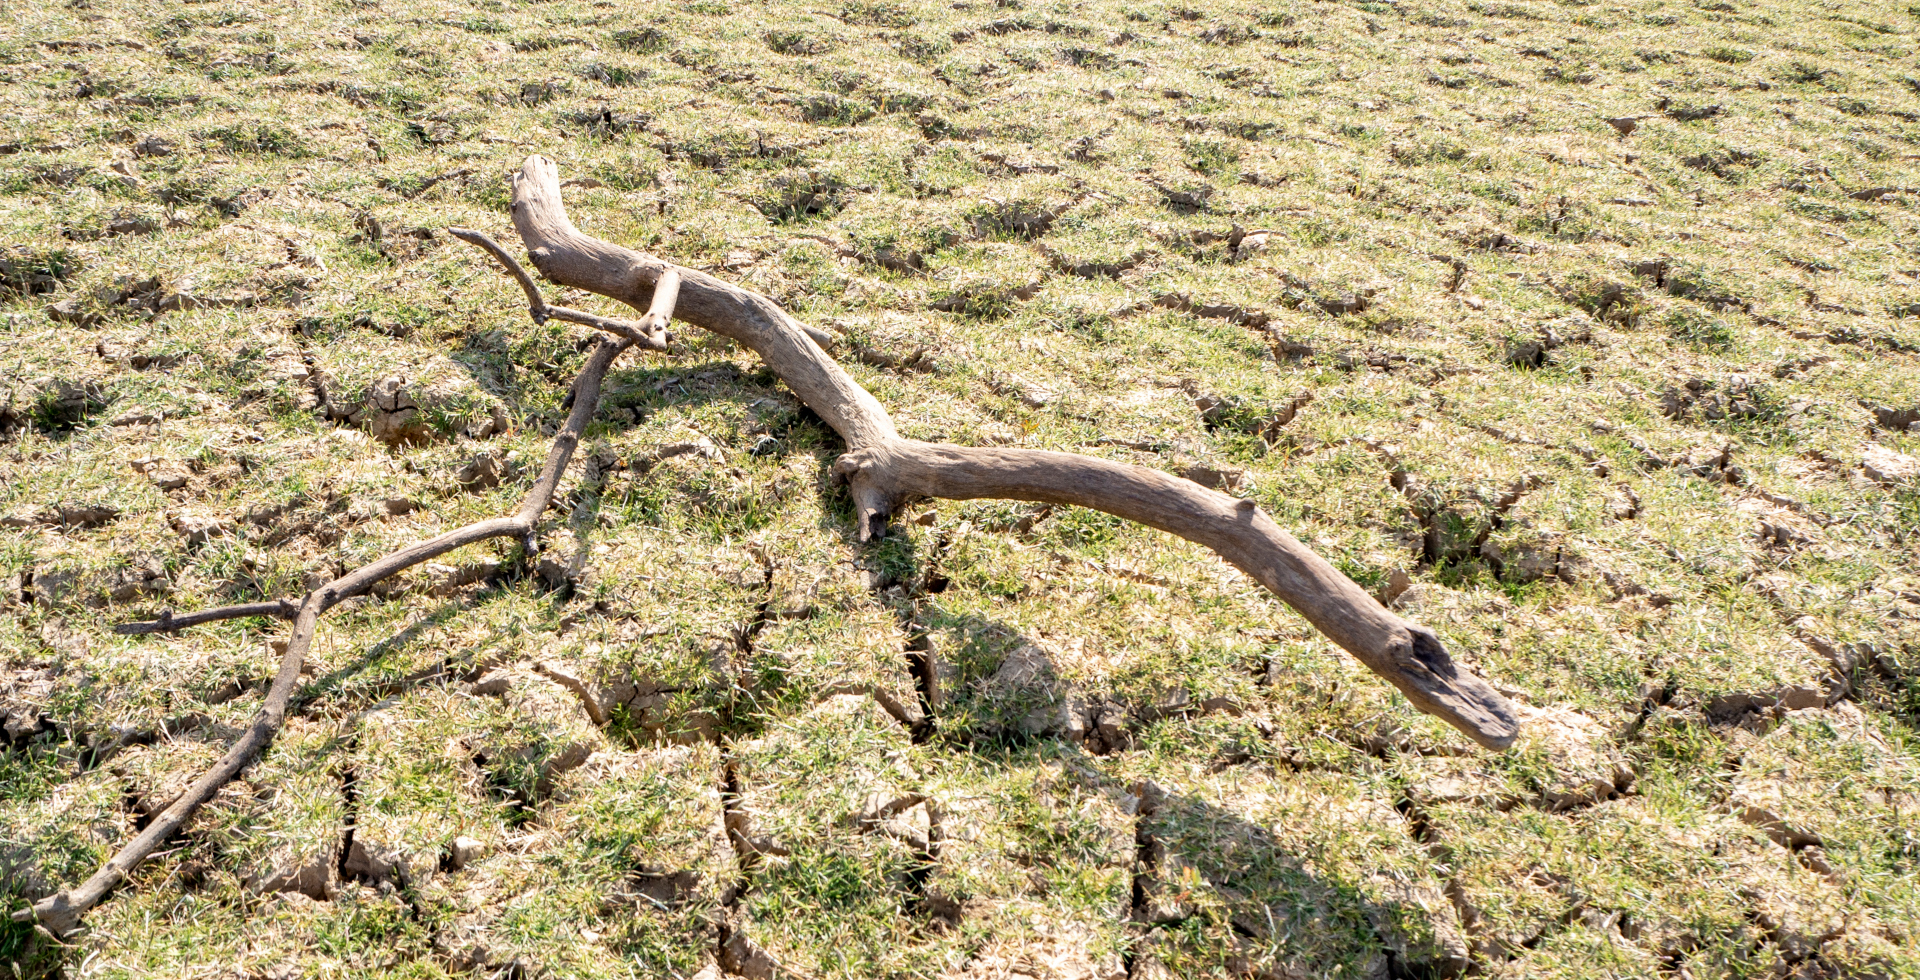 Withered branch on dried-up soil - Groundwater issues: hiding in plain sight